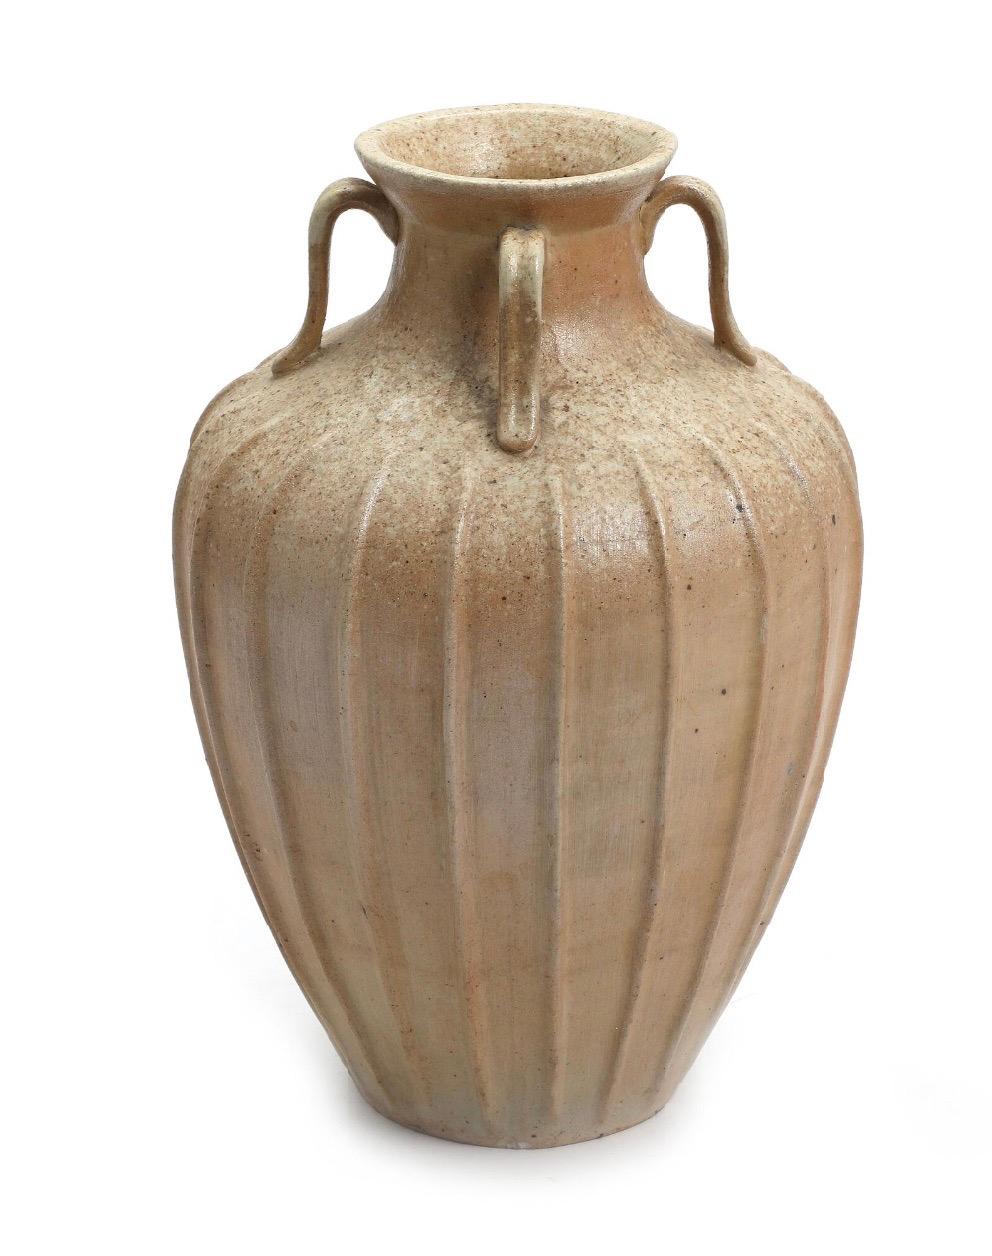 A danish glazed stoneware vase by unknown maker. 

circa 1950s 

Glazed stoneware vase, with four handles and fluted body. Unsigned.

Measure: Height: 12